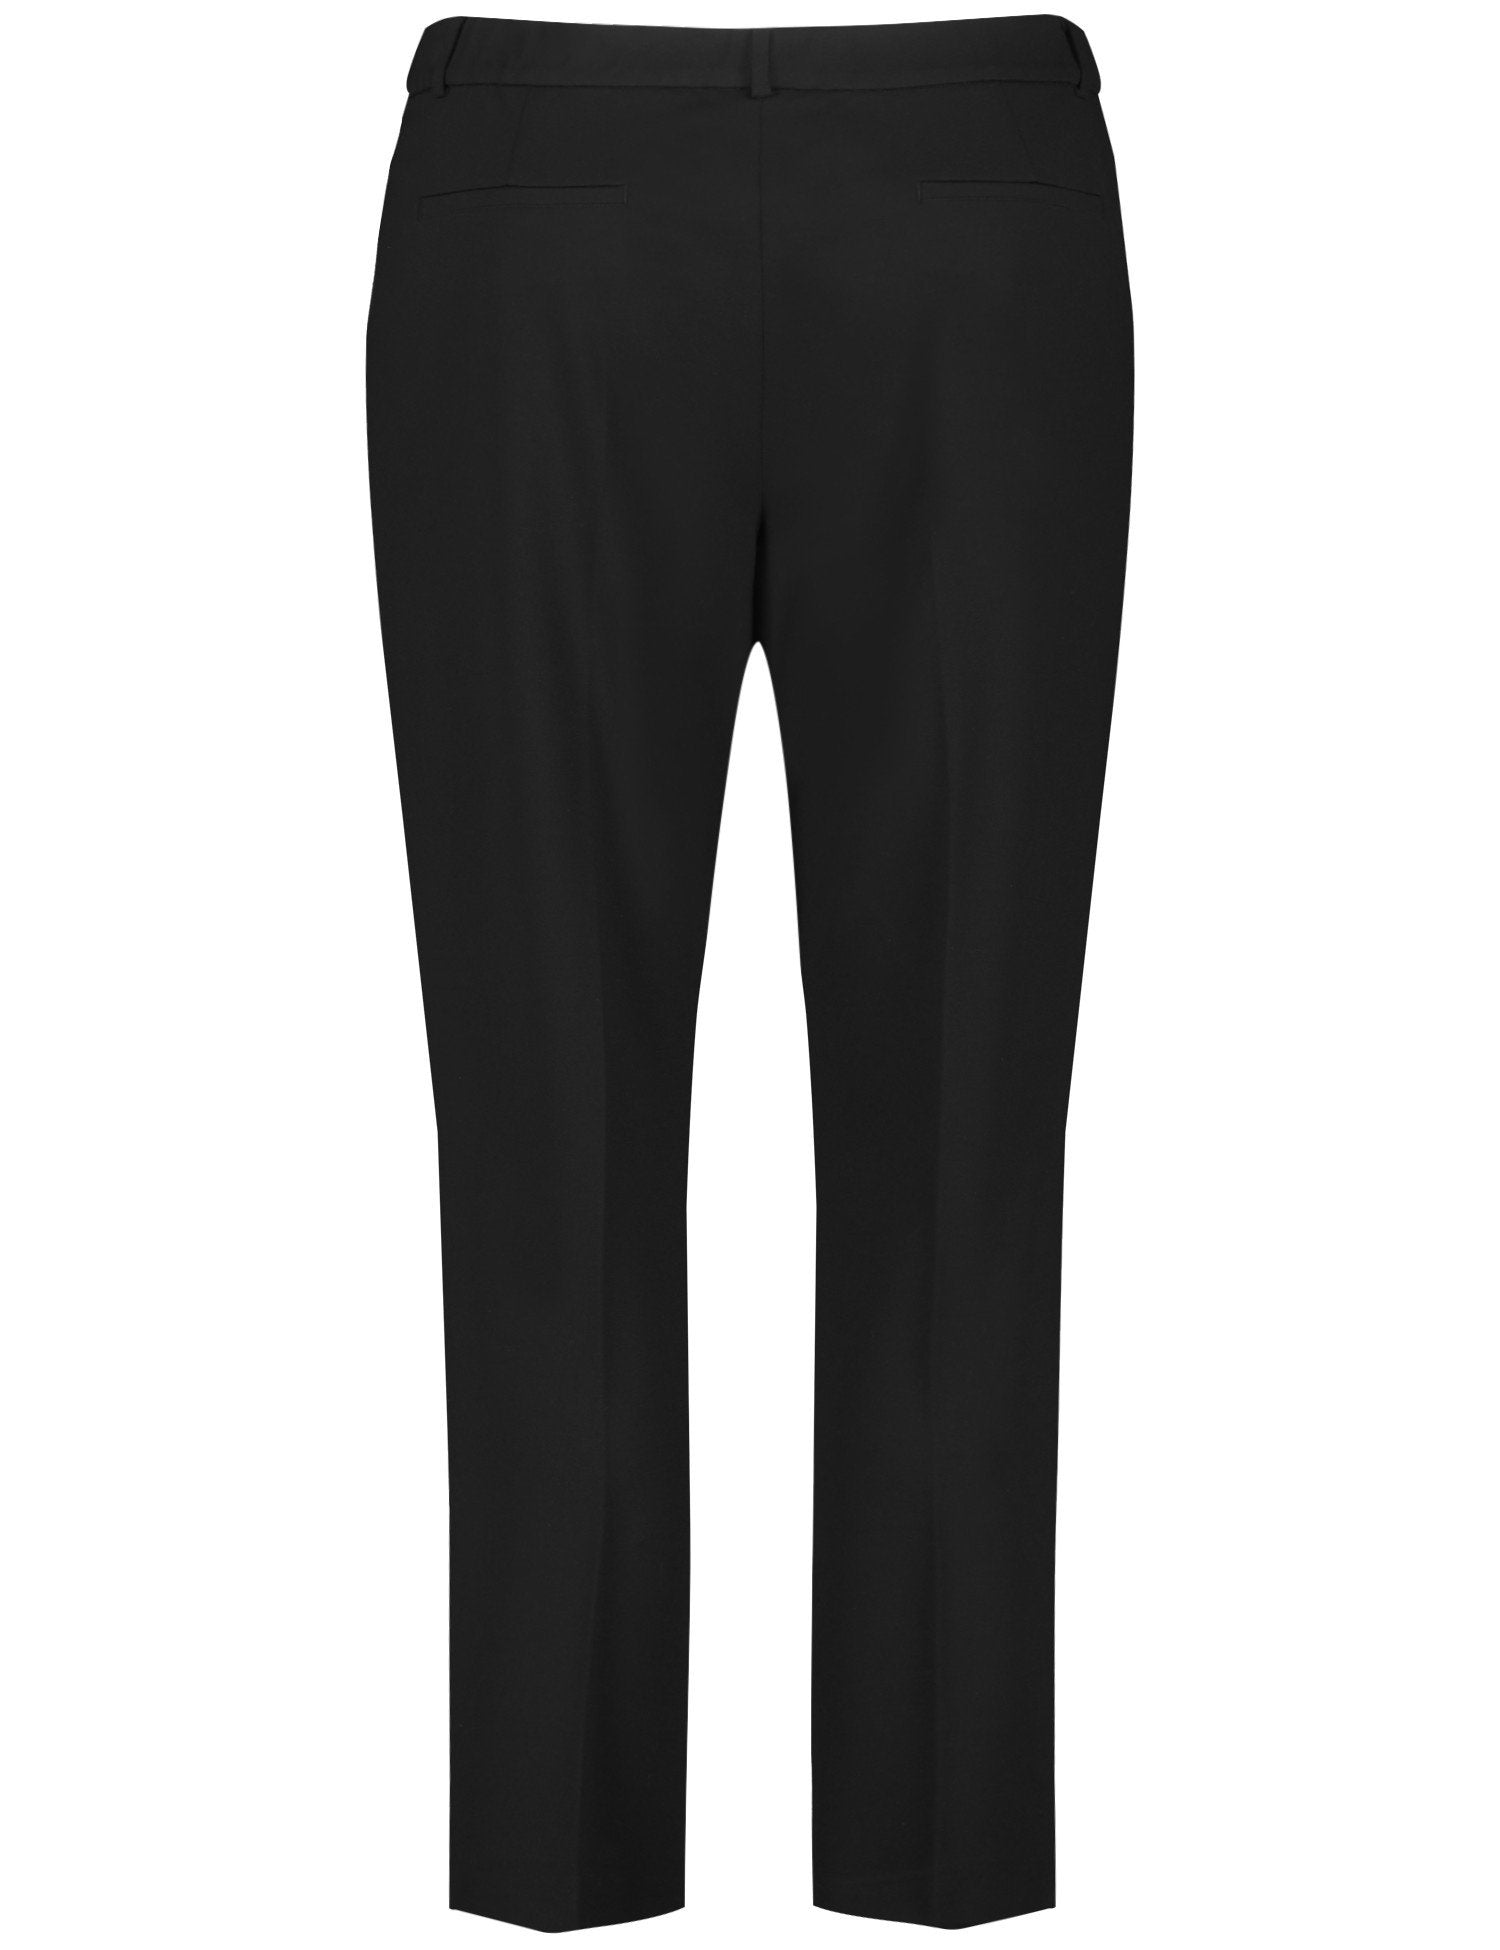 Greta Sophisticated 7/8-Length Trousers_920981-29038_1100_03